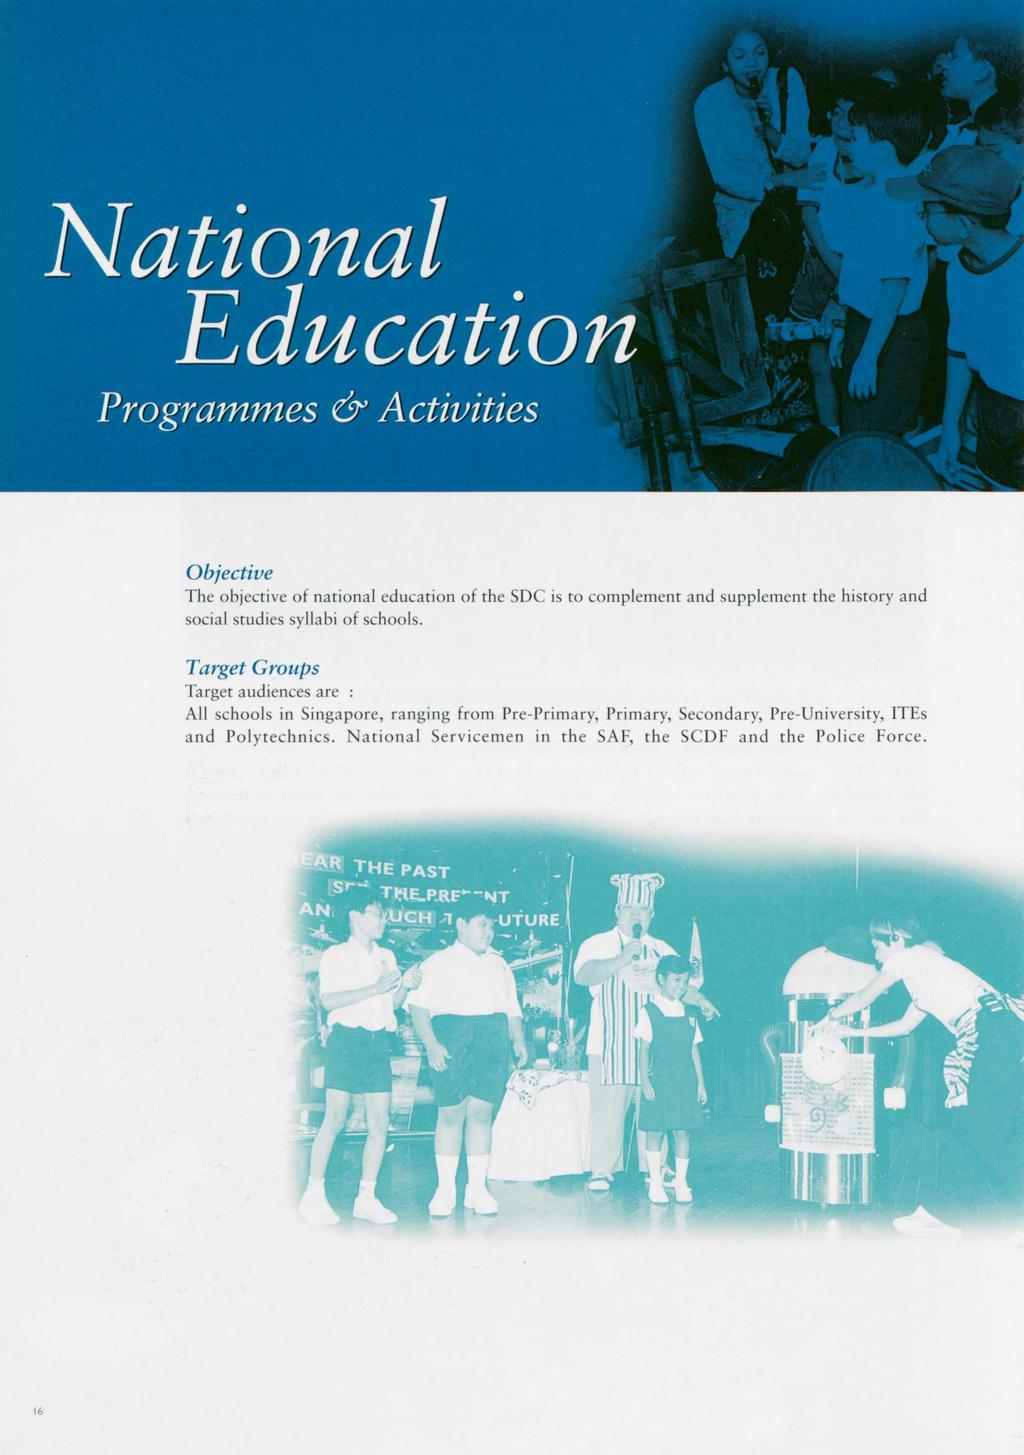 National Education Programmes & Activities Objective The objective of national education of the SDC is to complement and supplement the history and social studies syllabi of schools.